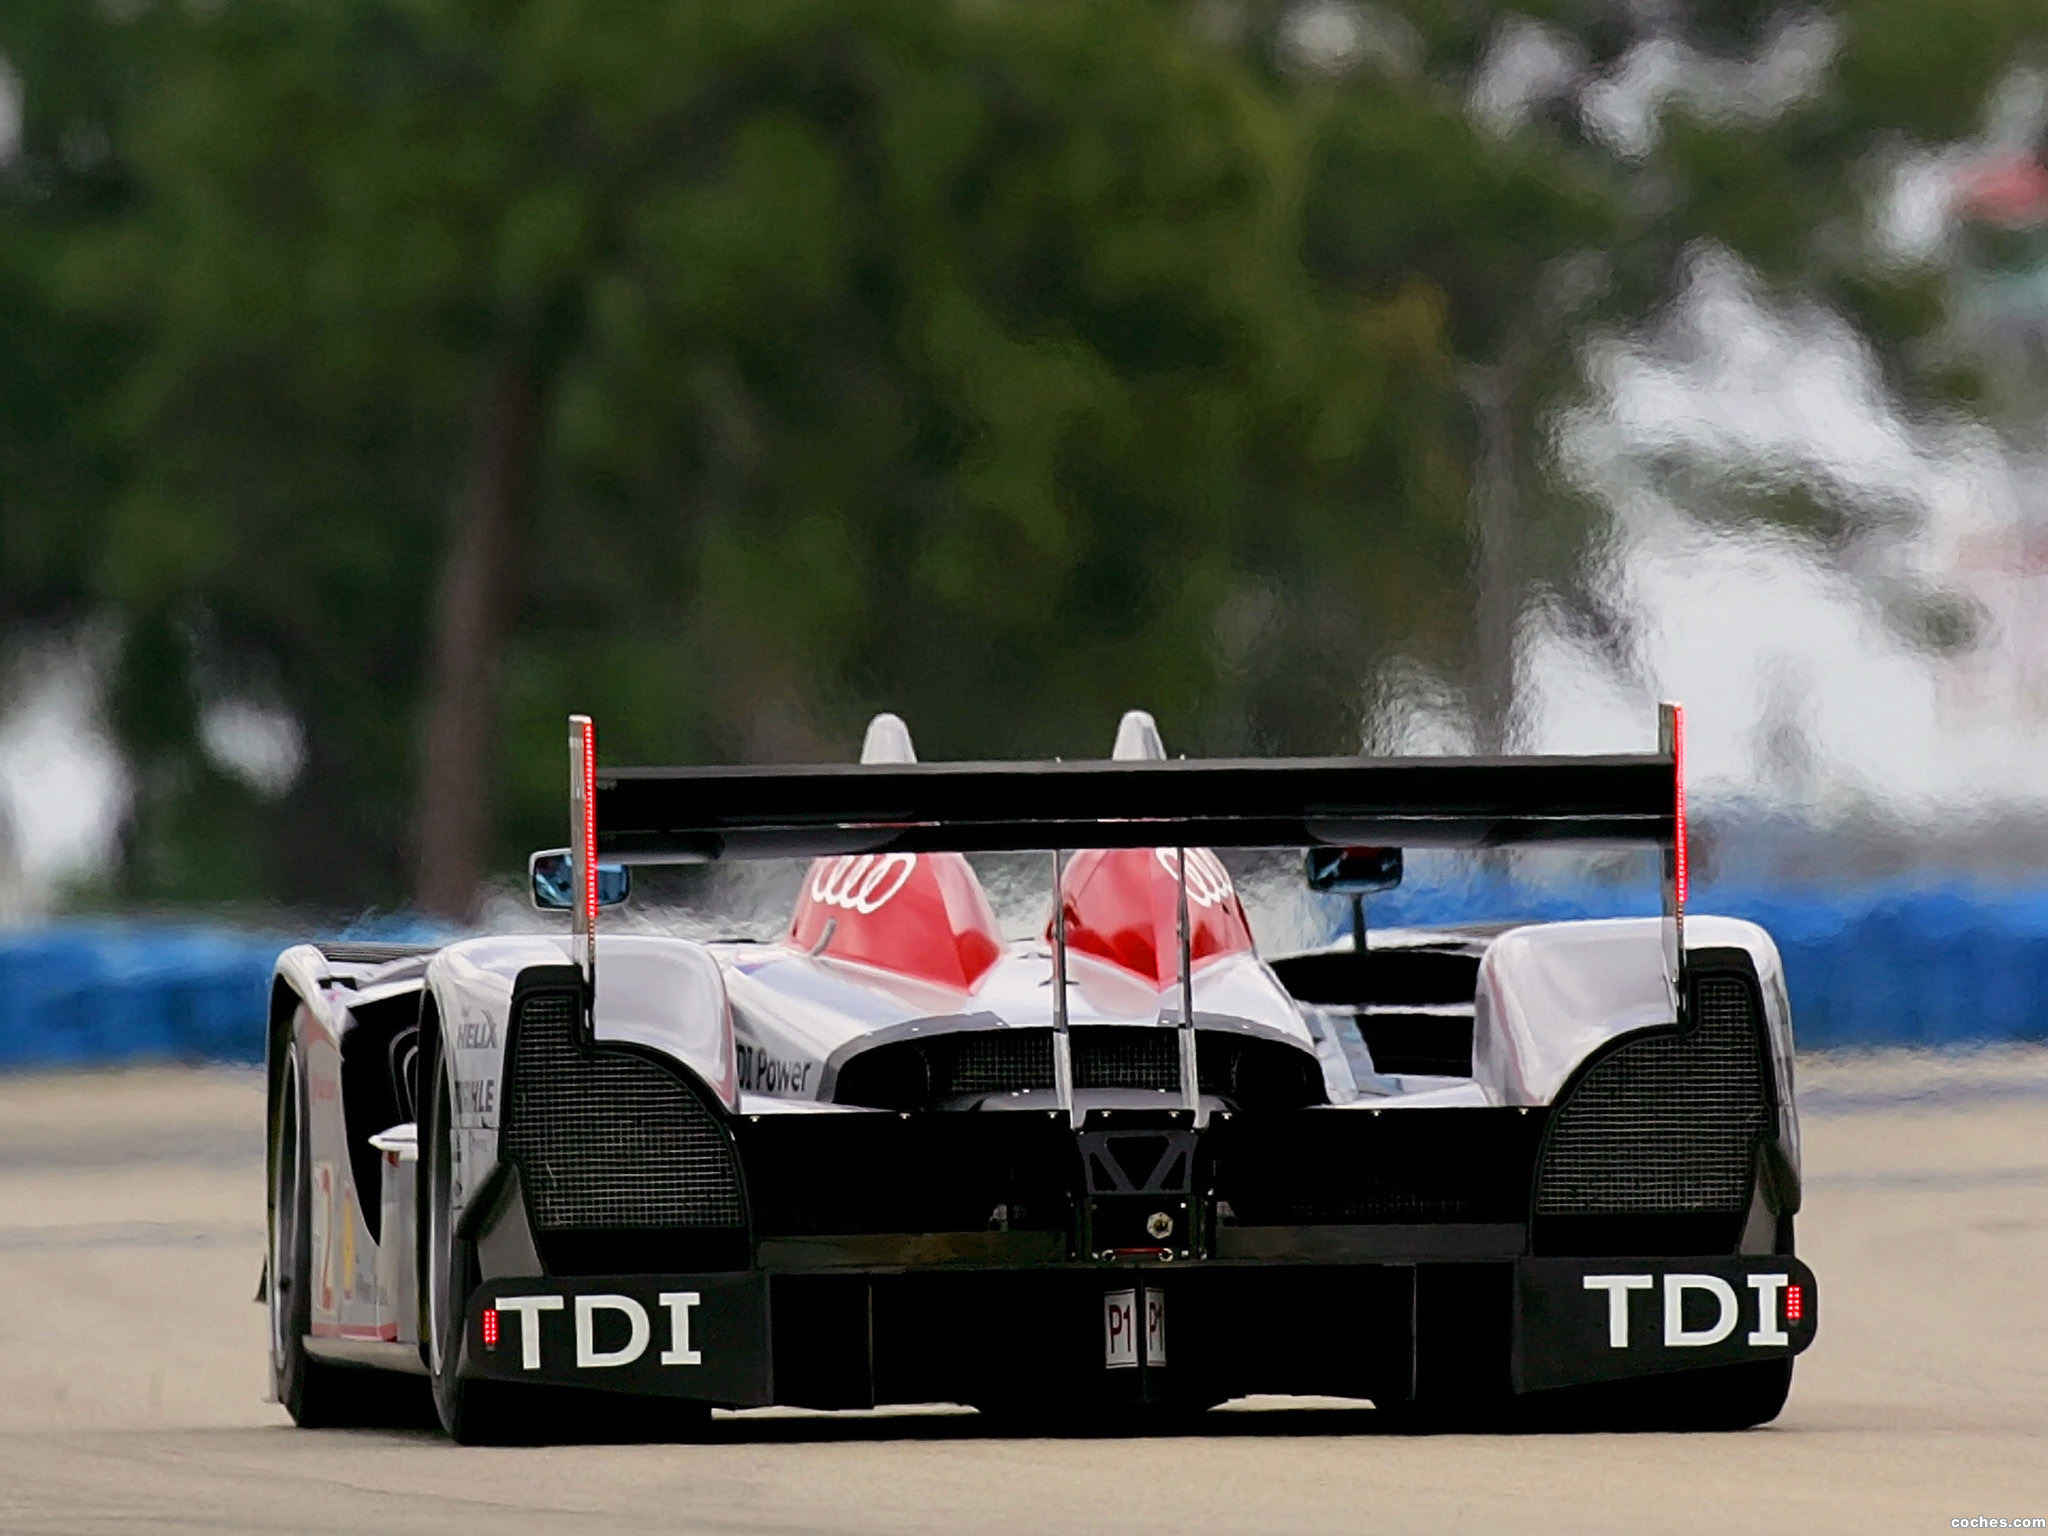 The 2009 Audi R15 TDI: A Powerful And Efficient Sports Car